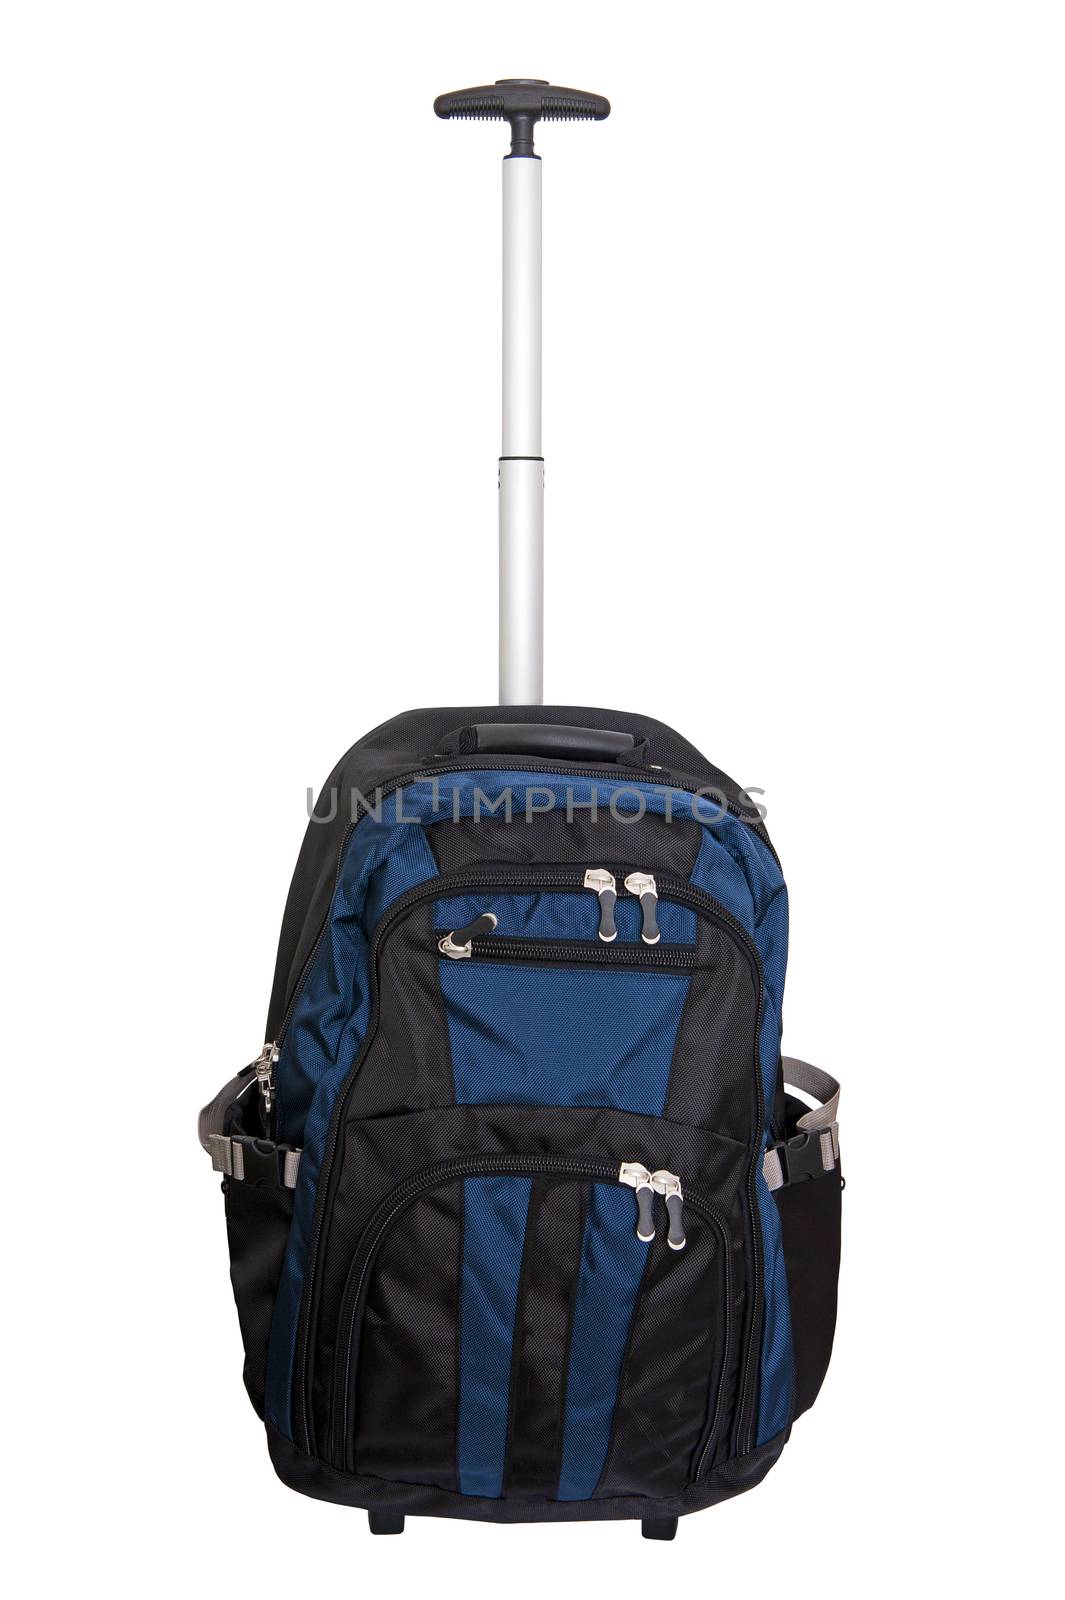 Backpack with wheels isolated on the white background